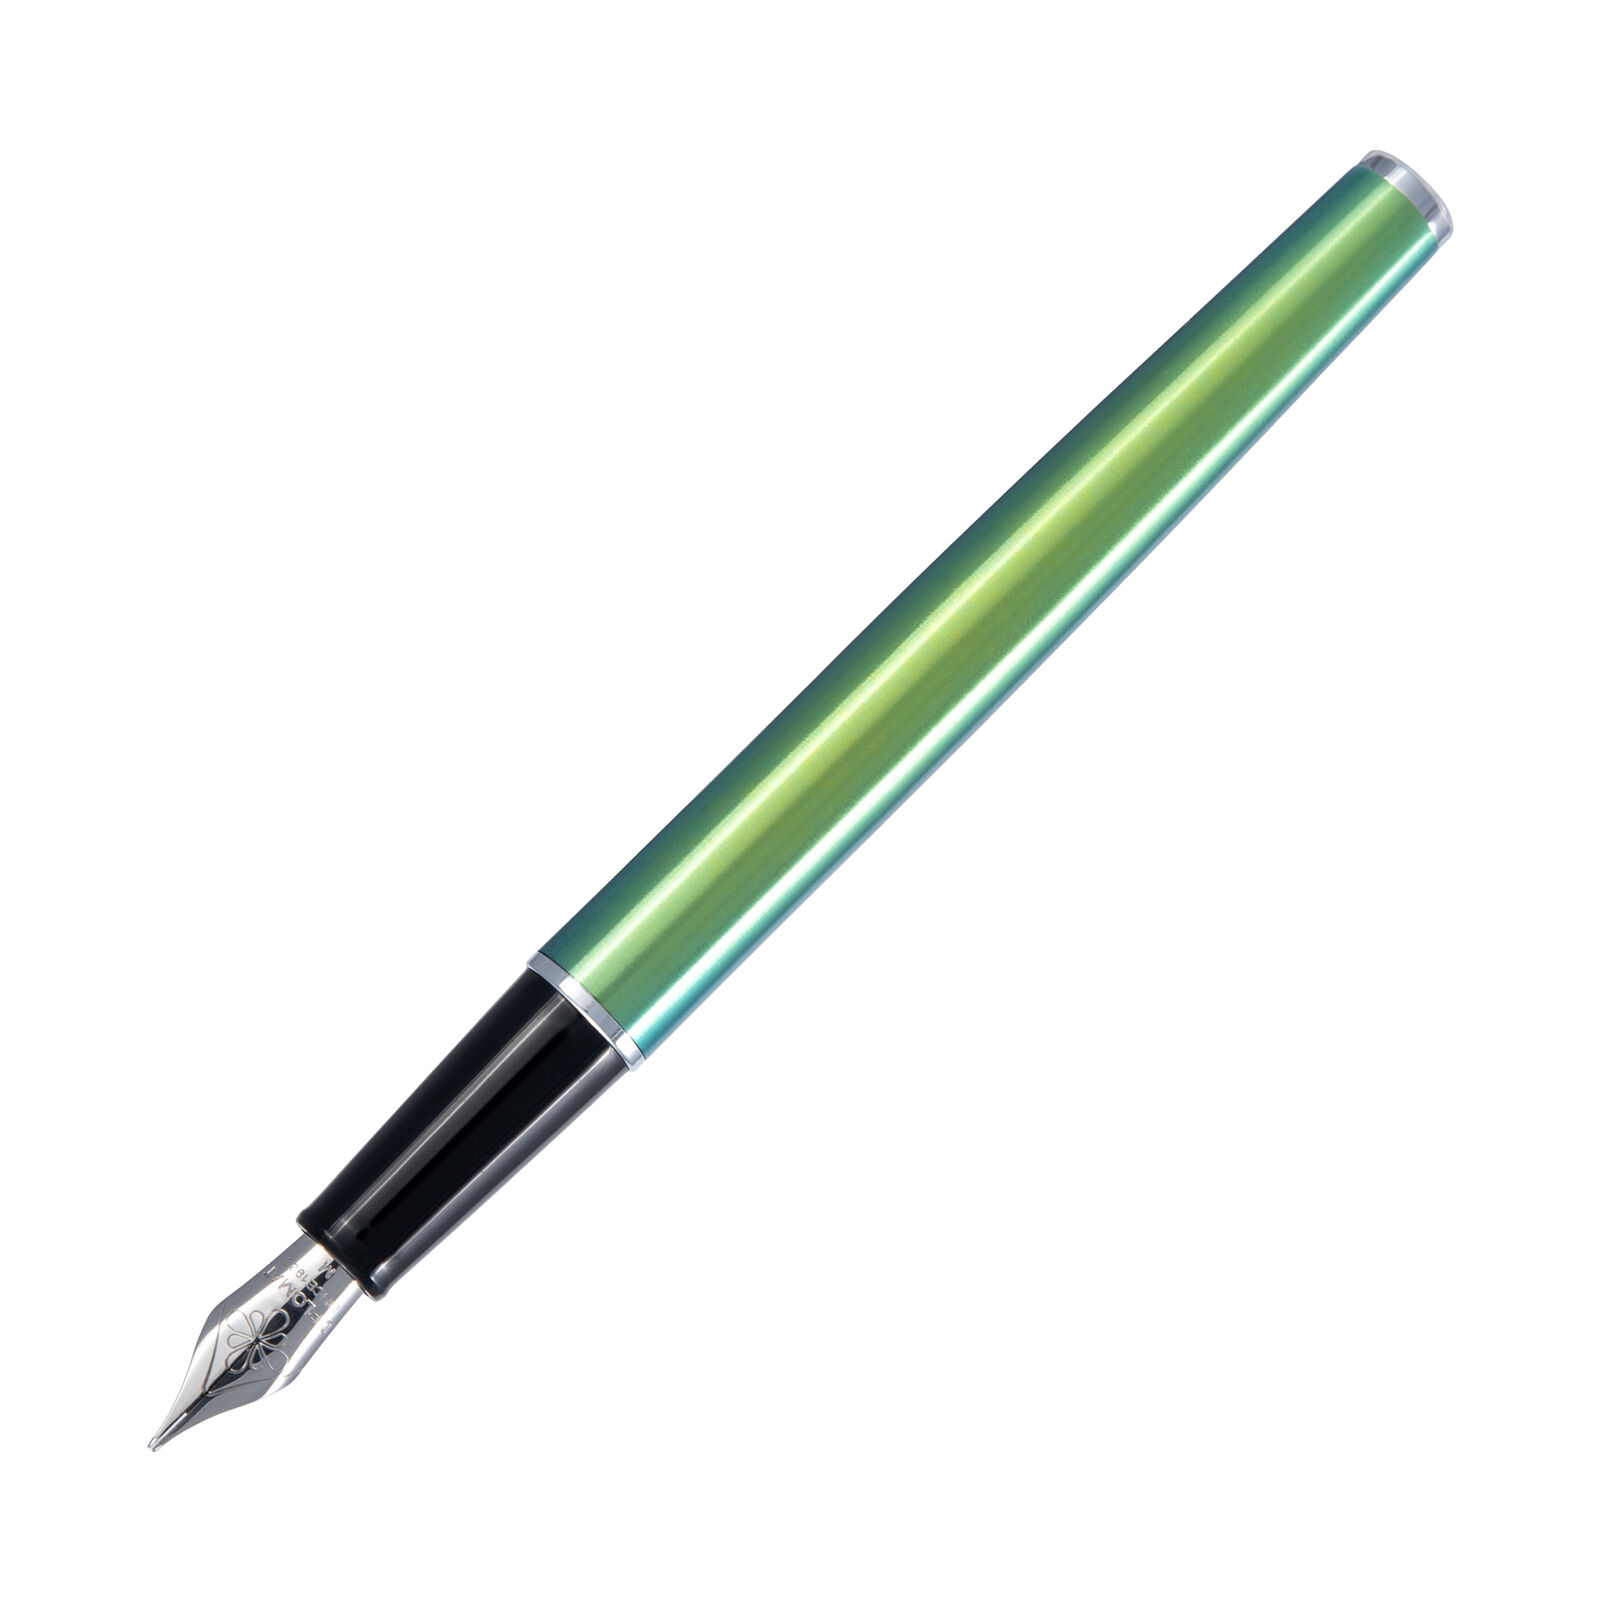 Diplomat Traveller Fountain Pen in Funky Green - Fine Point - NEW in Box